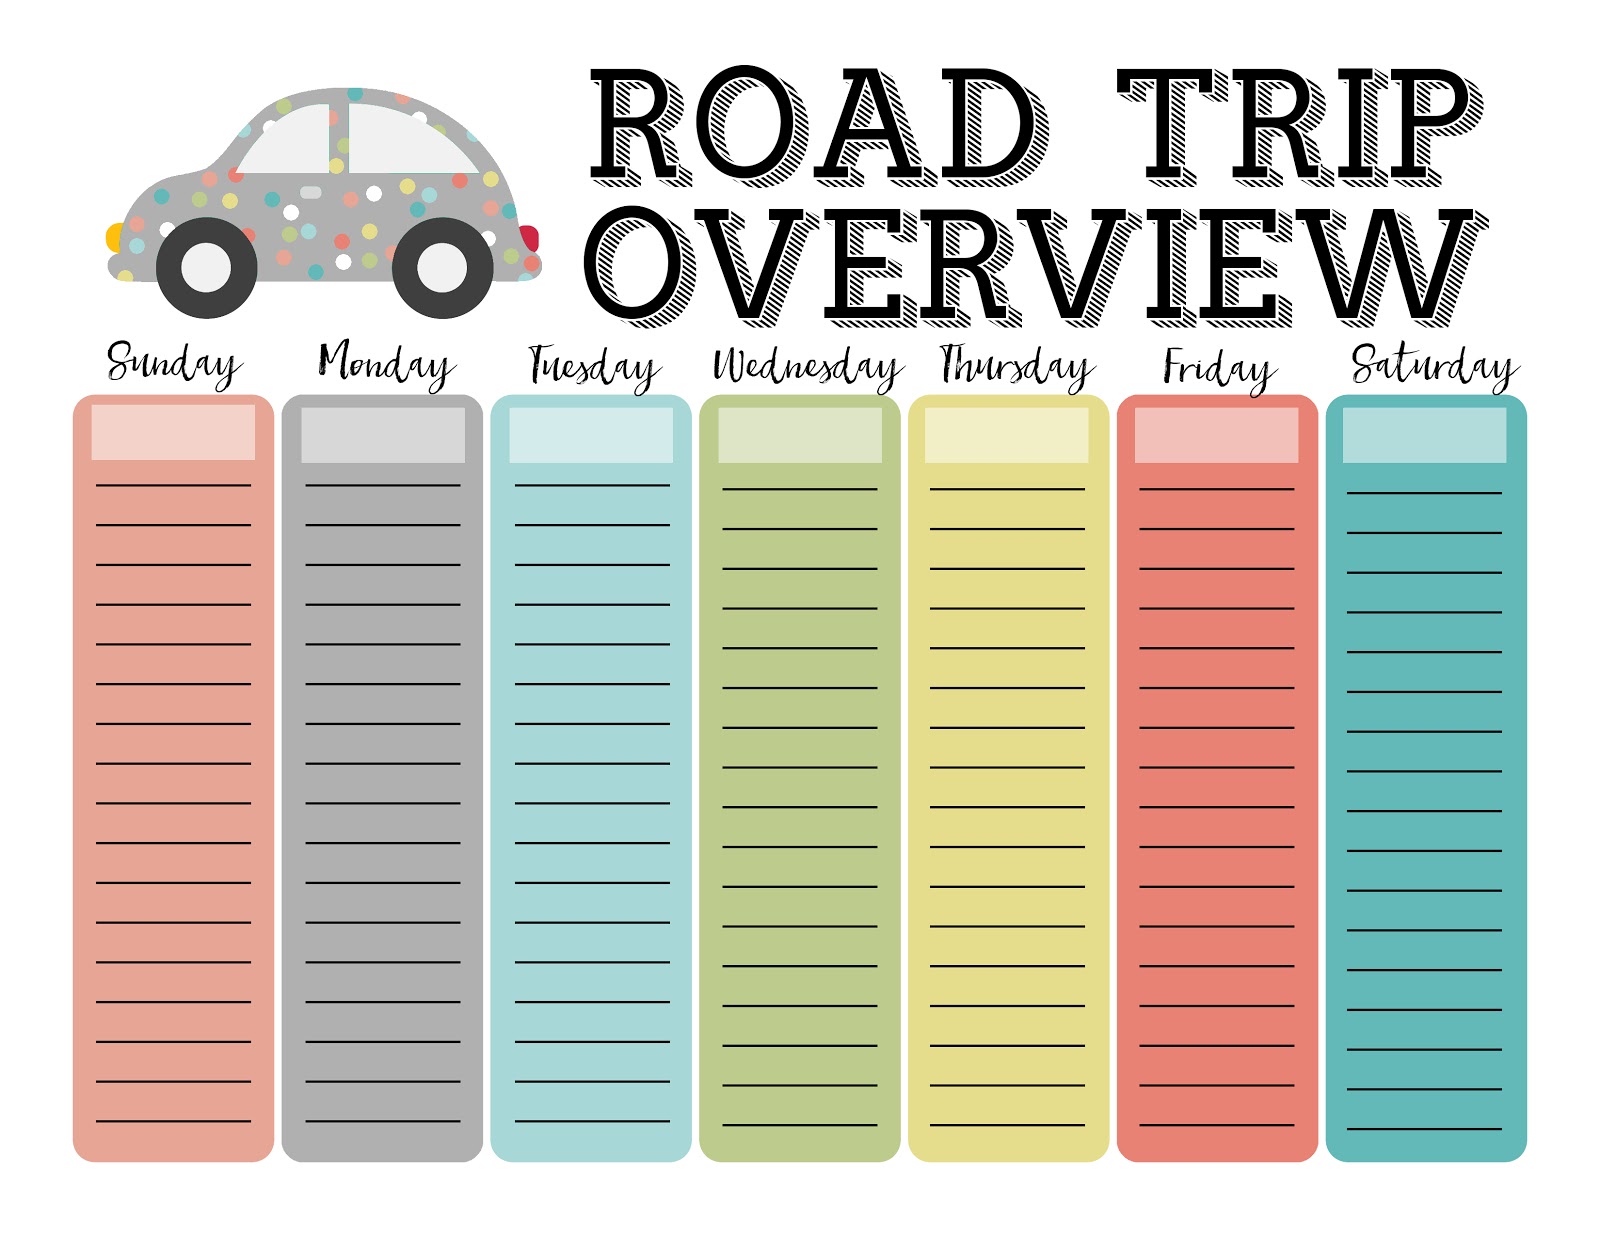 road trip planner with times